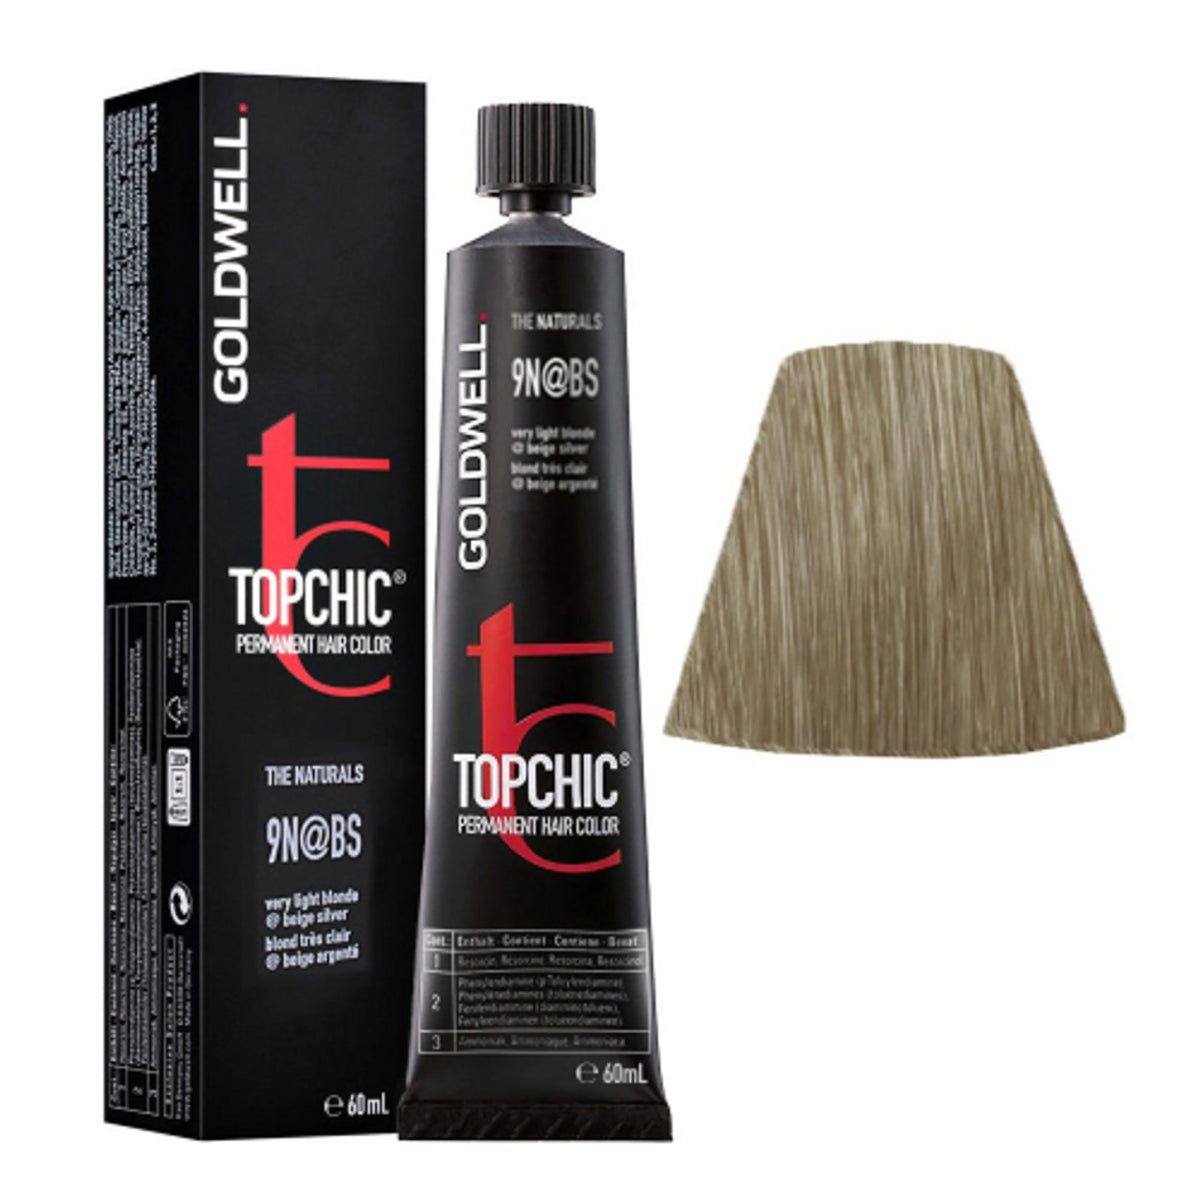 Goldwell Topchic Tube 60ml - MORE COLOURS - Southwestsix Cosmetics Goldwell Topchic Tube 60ml - MORE COLOURS - Hair Dyes Goldwell Southwestsix Cosmetics 9N@BS Goldwell Topchic Tube 60ml - MORE COLOURS -